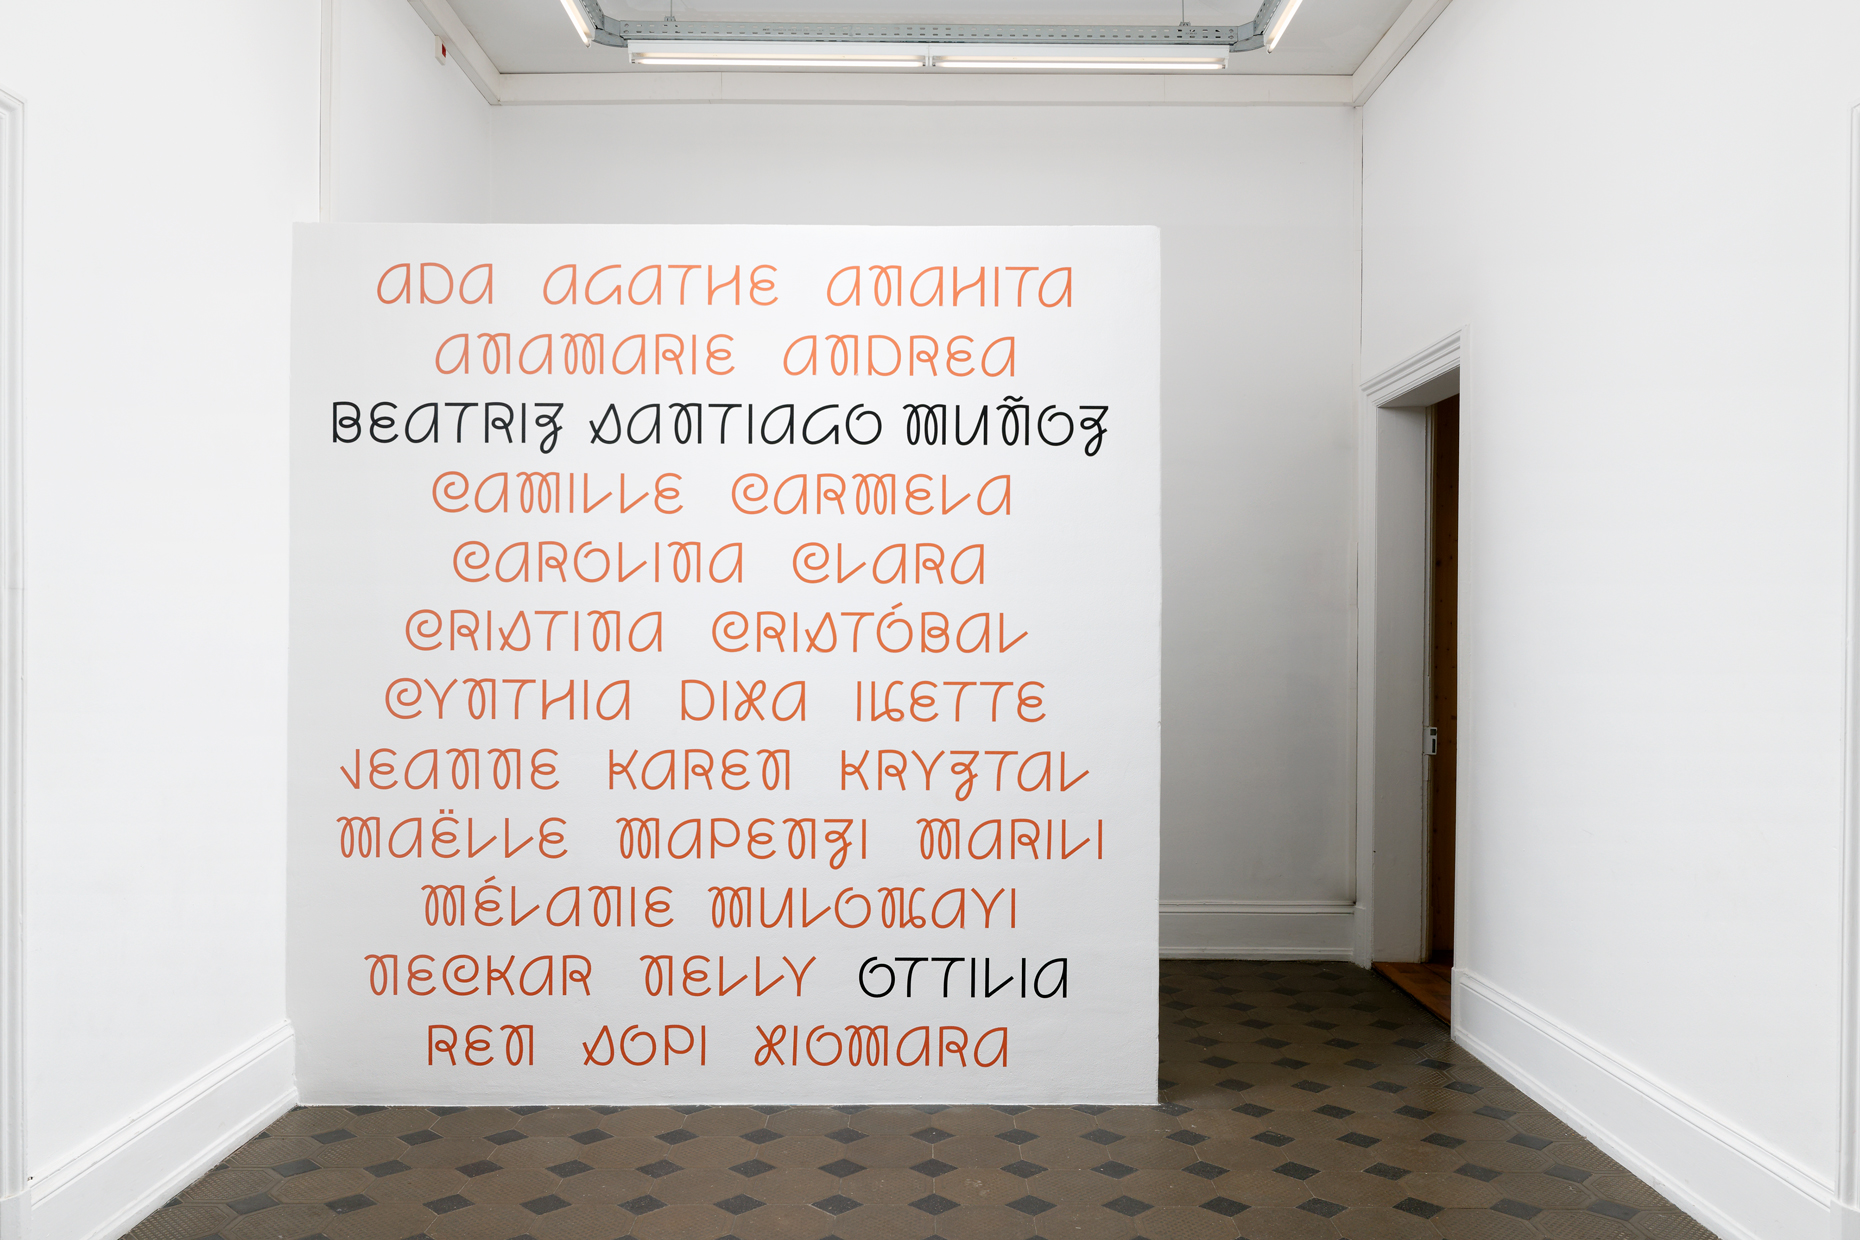 A large wall within the exhibition is decoratively adorned with the names of participants and of the artist acting as a credits for those whose work and contribution is shown with their names in orange and the exhibition title and artist's name in black.